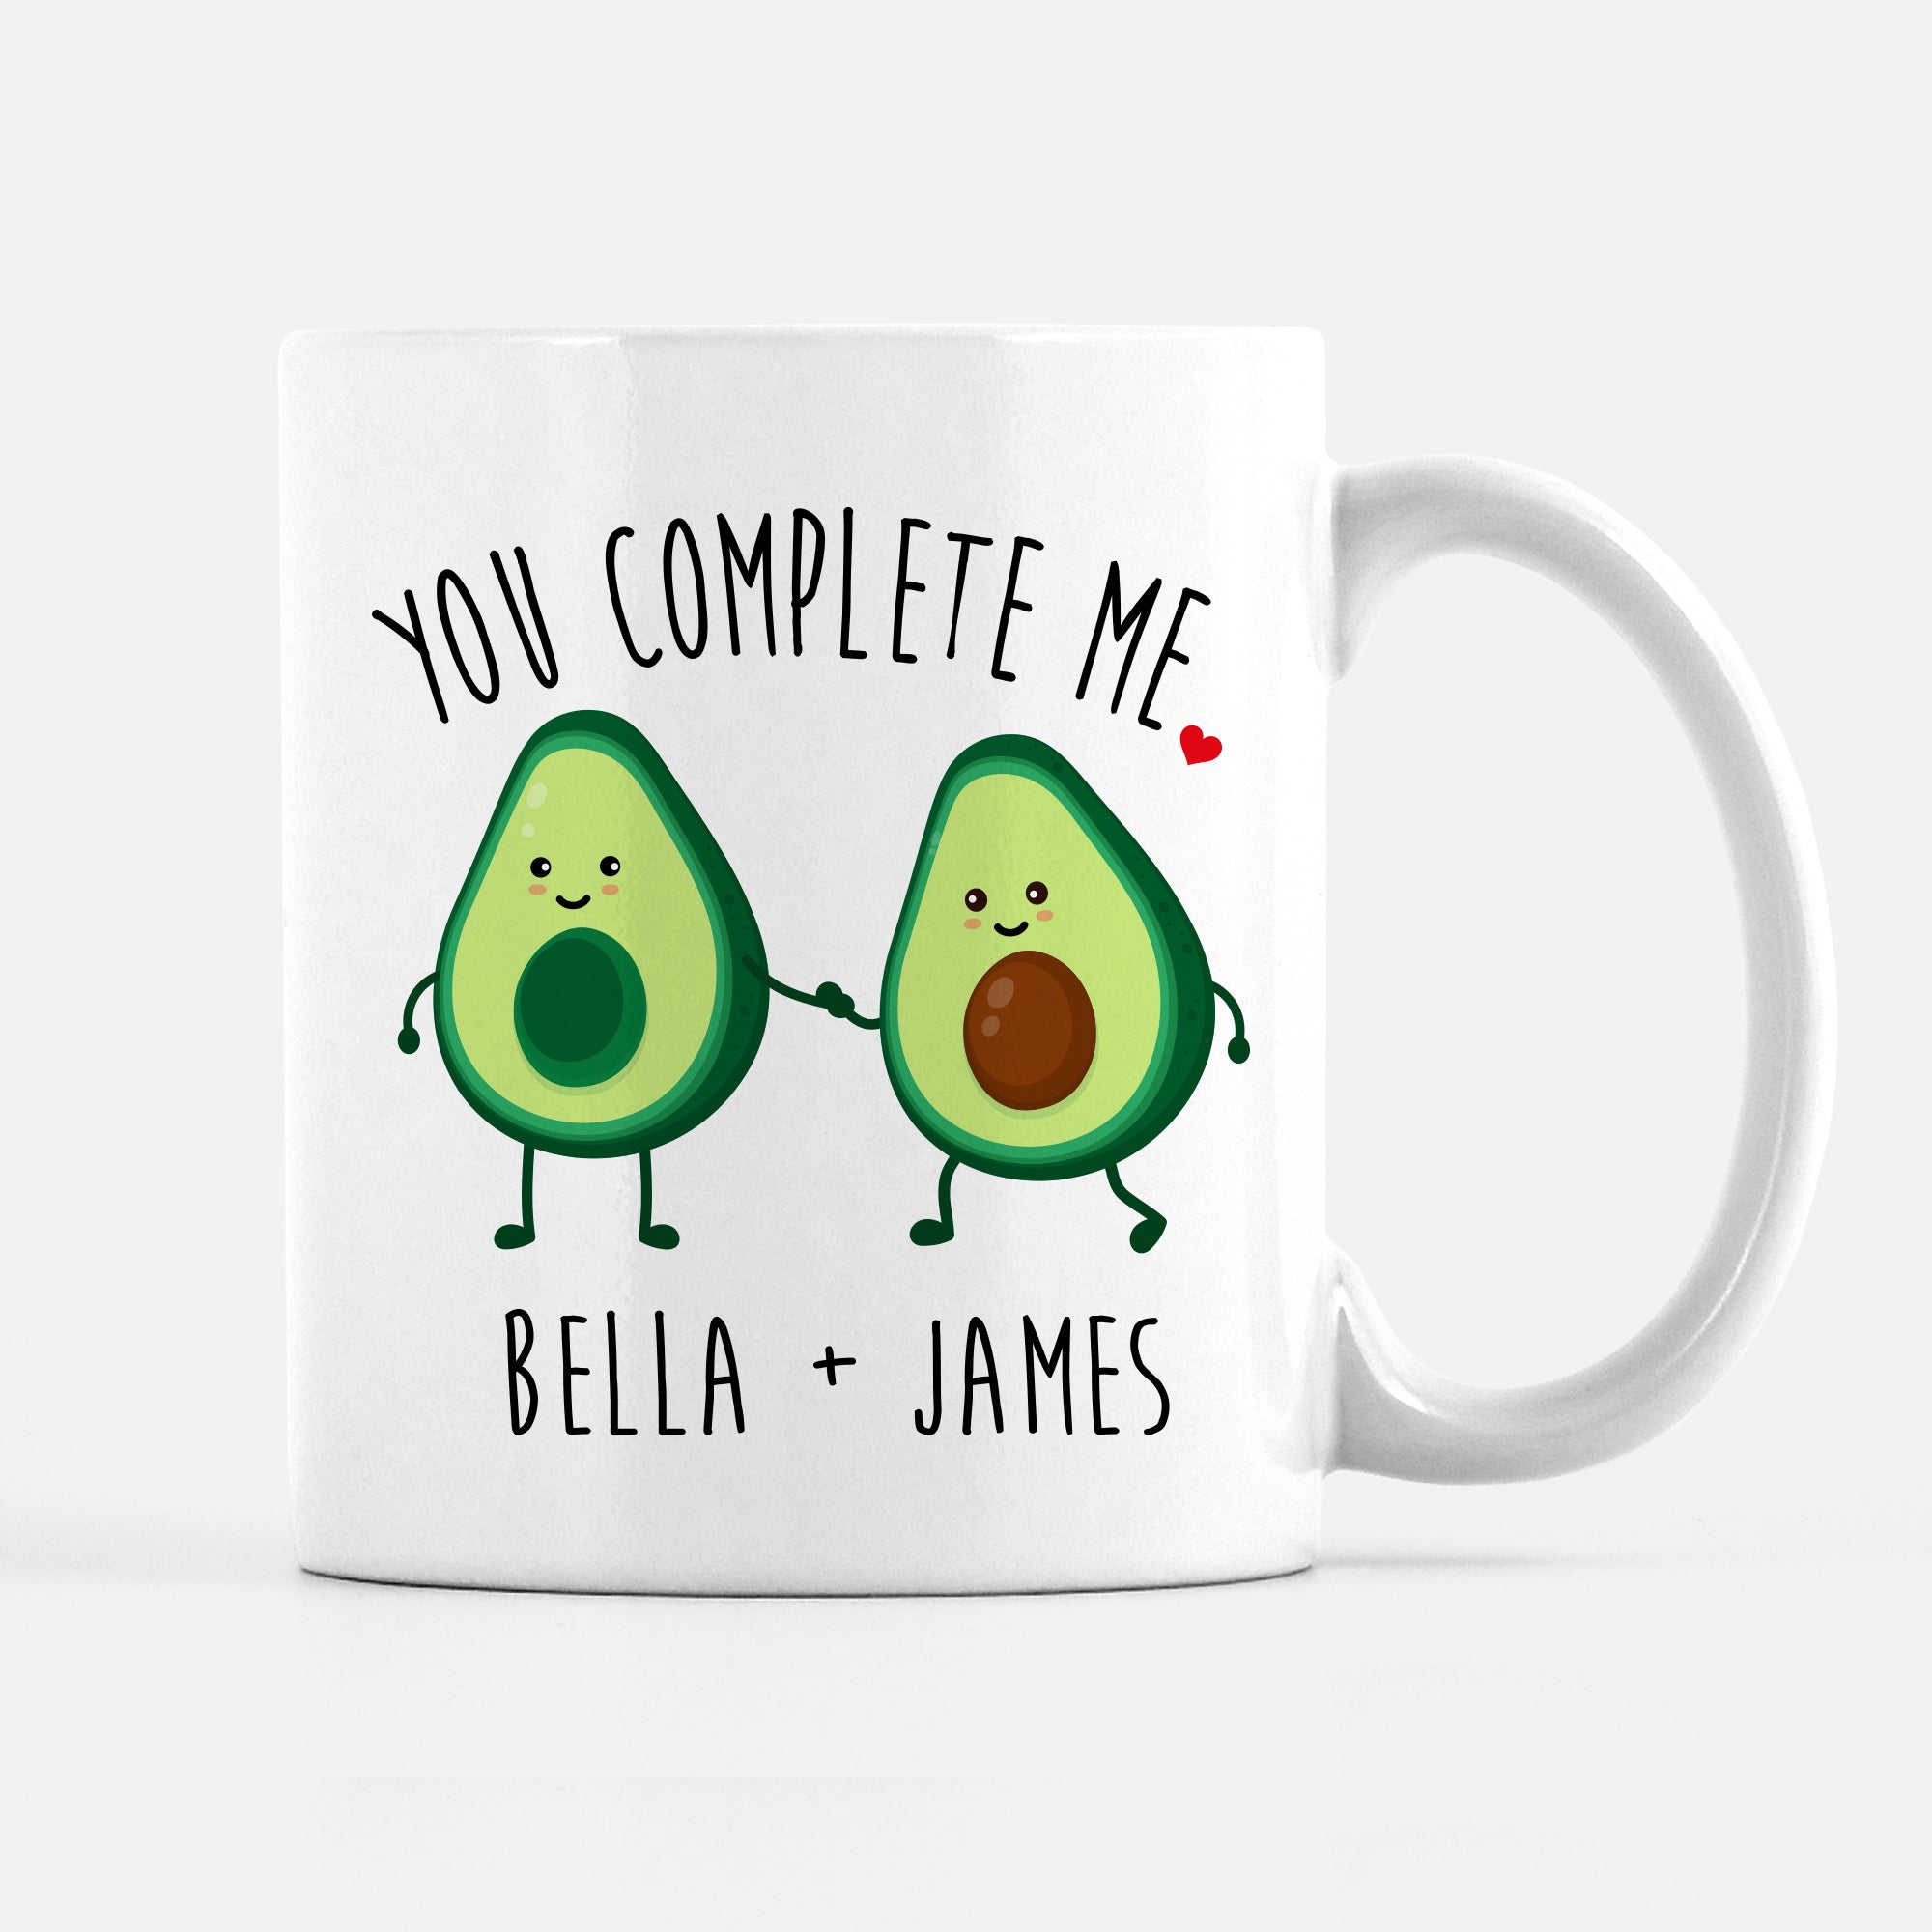 Avocado Mug, You Complete Me, Personalized with Couple's Names, Perfect for Valentines Day, Engagement gift, or anniversary, PIPSY.COM